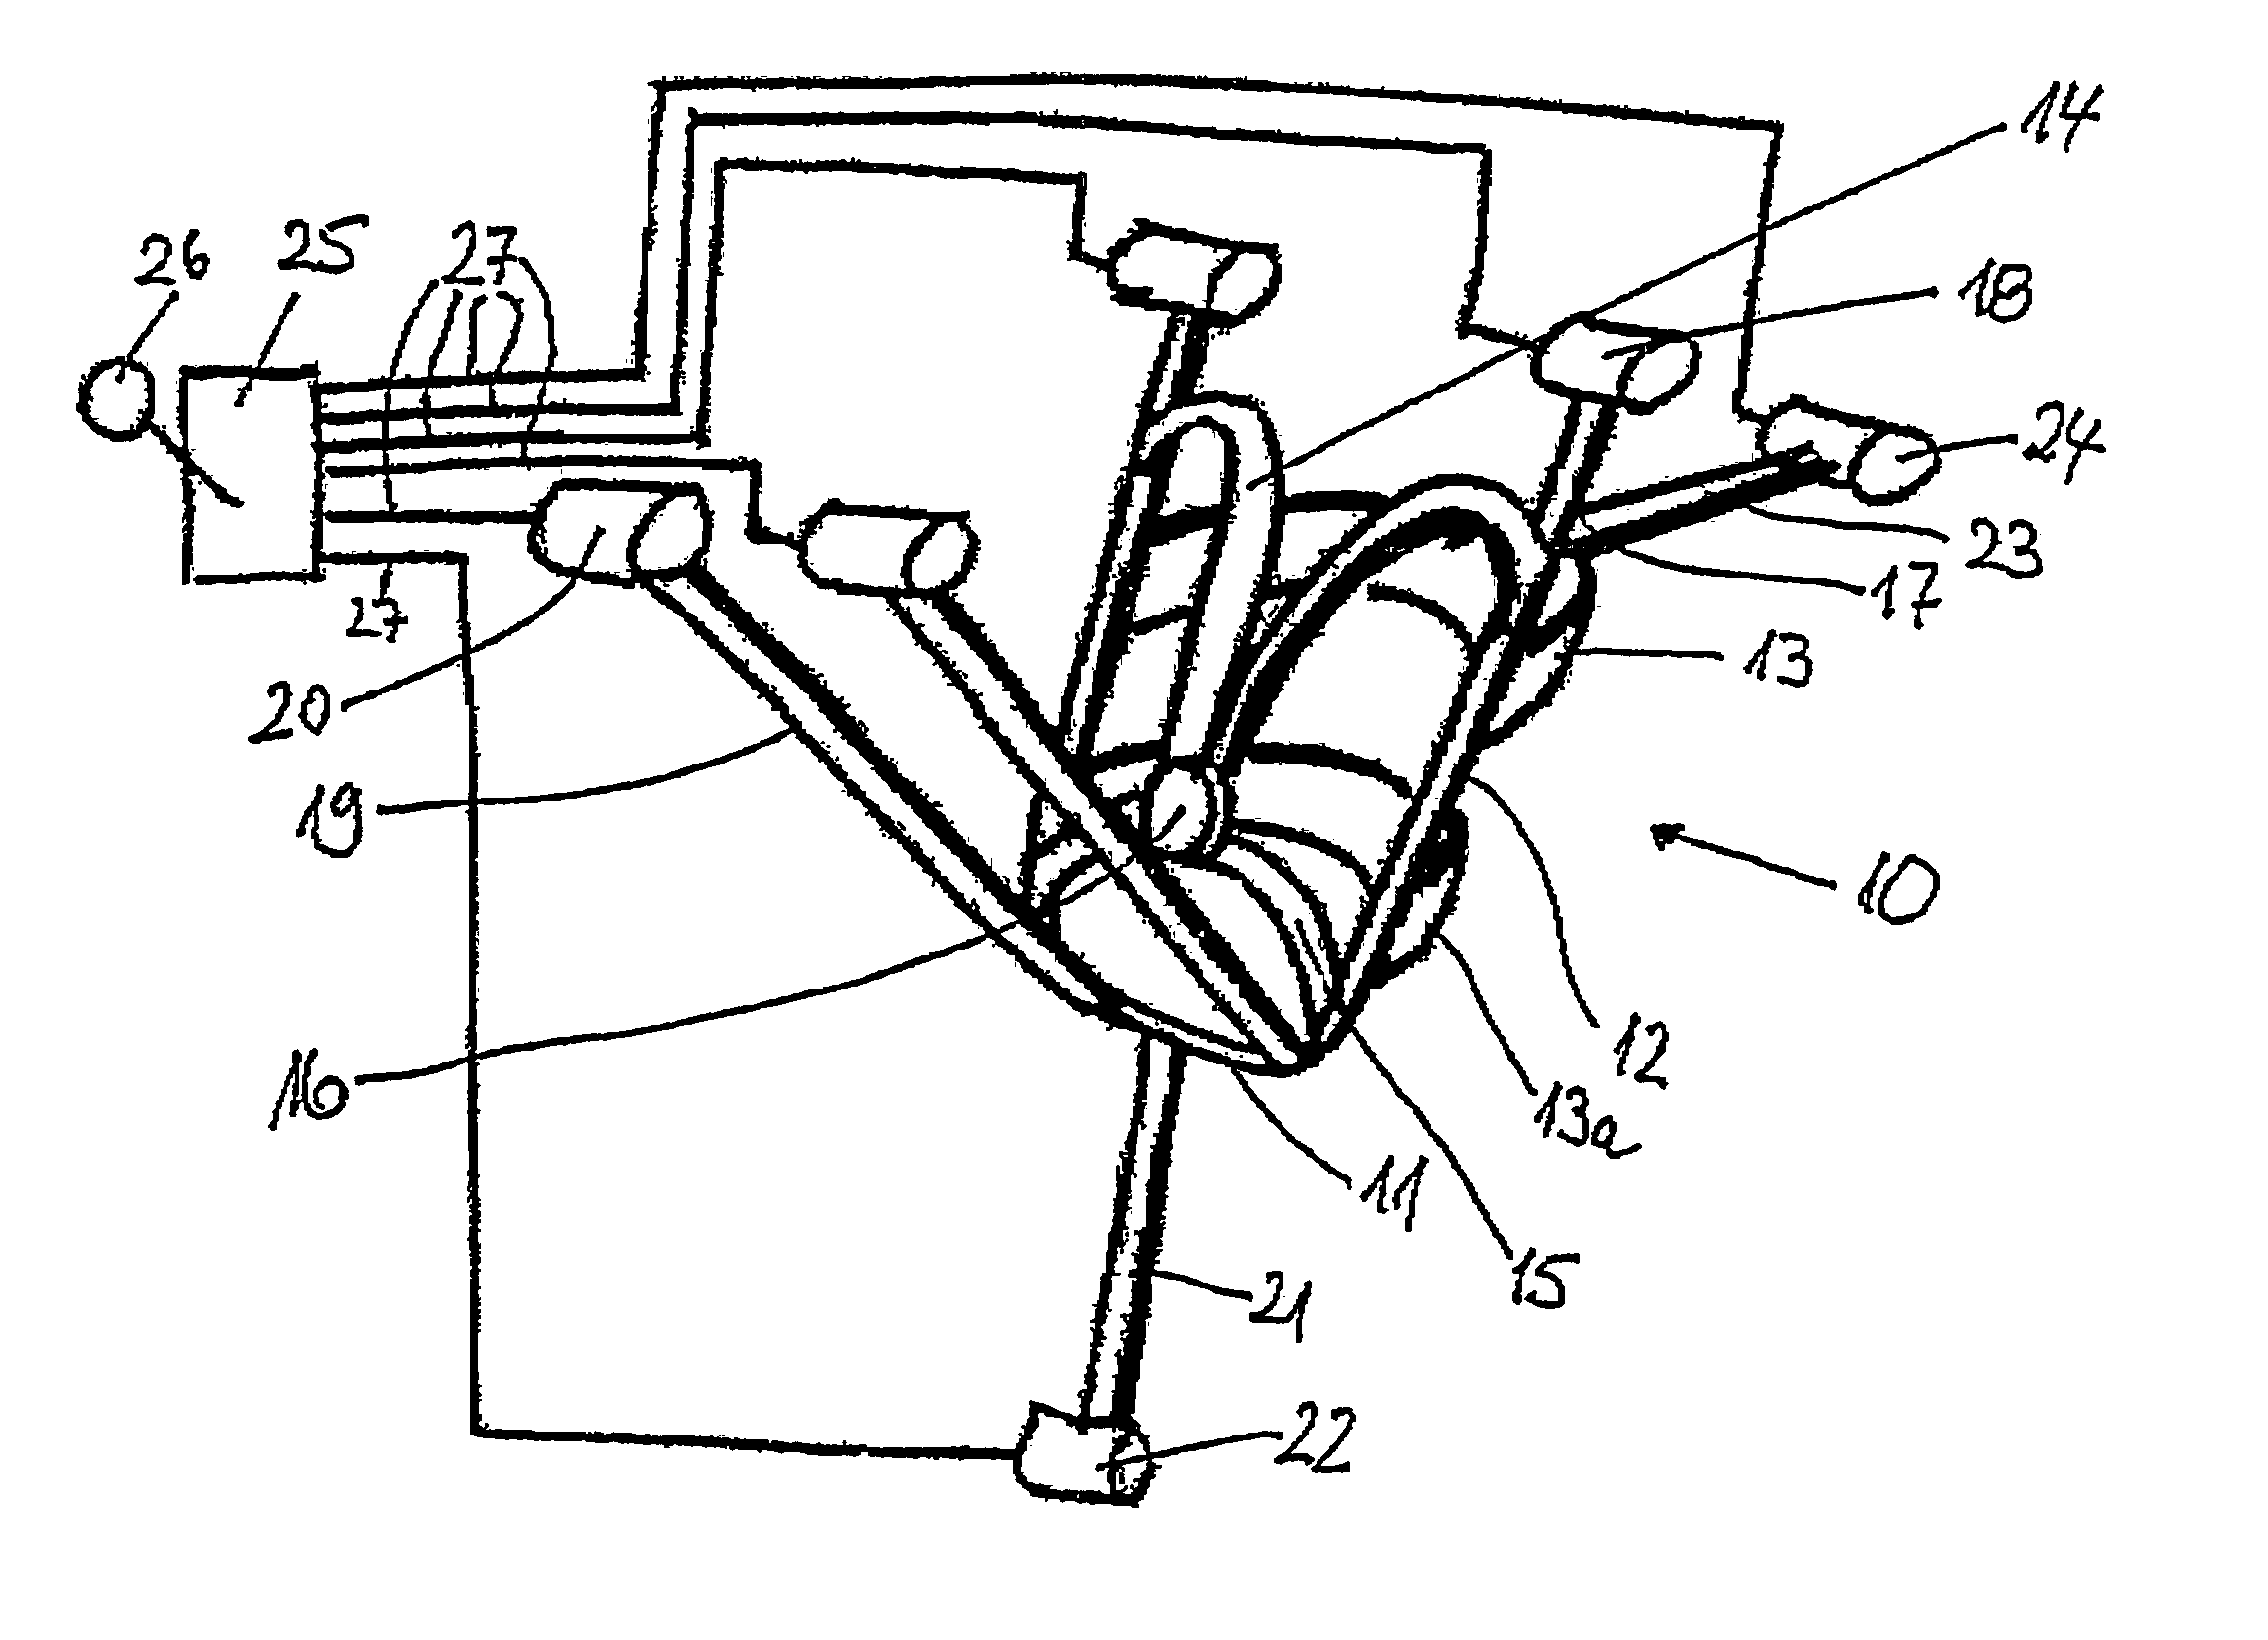 Safety seat, suspended in a land vehicle, aircraft or vessel